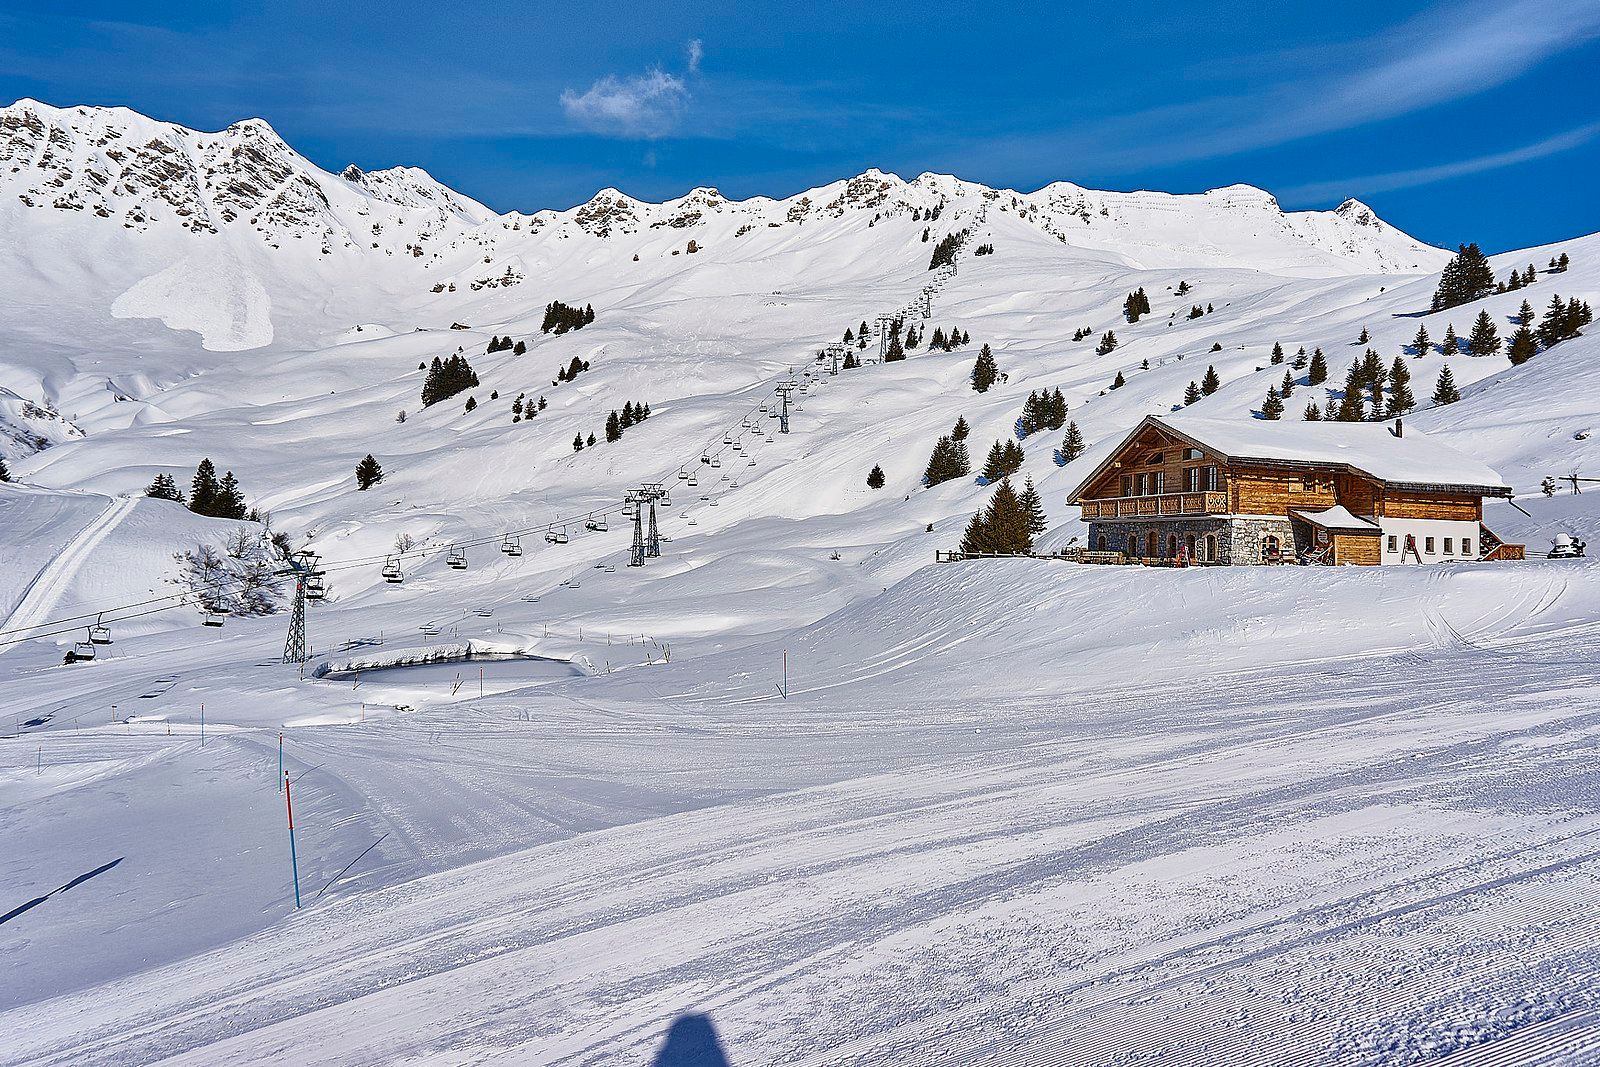 12 of the world's biggest ski areas